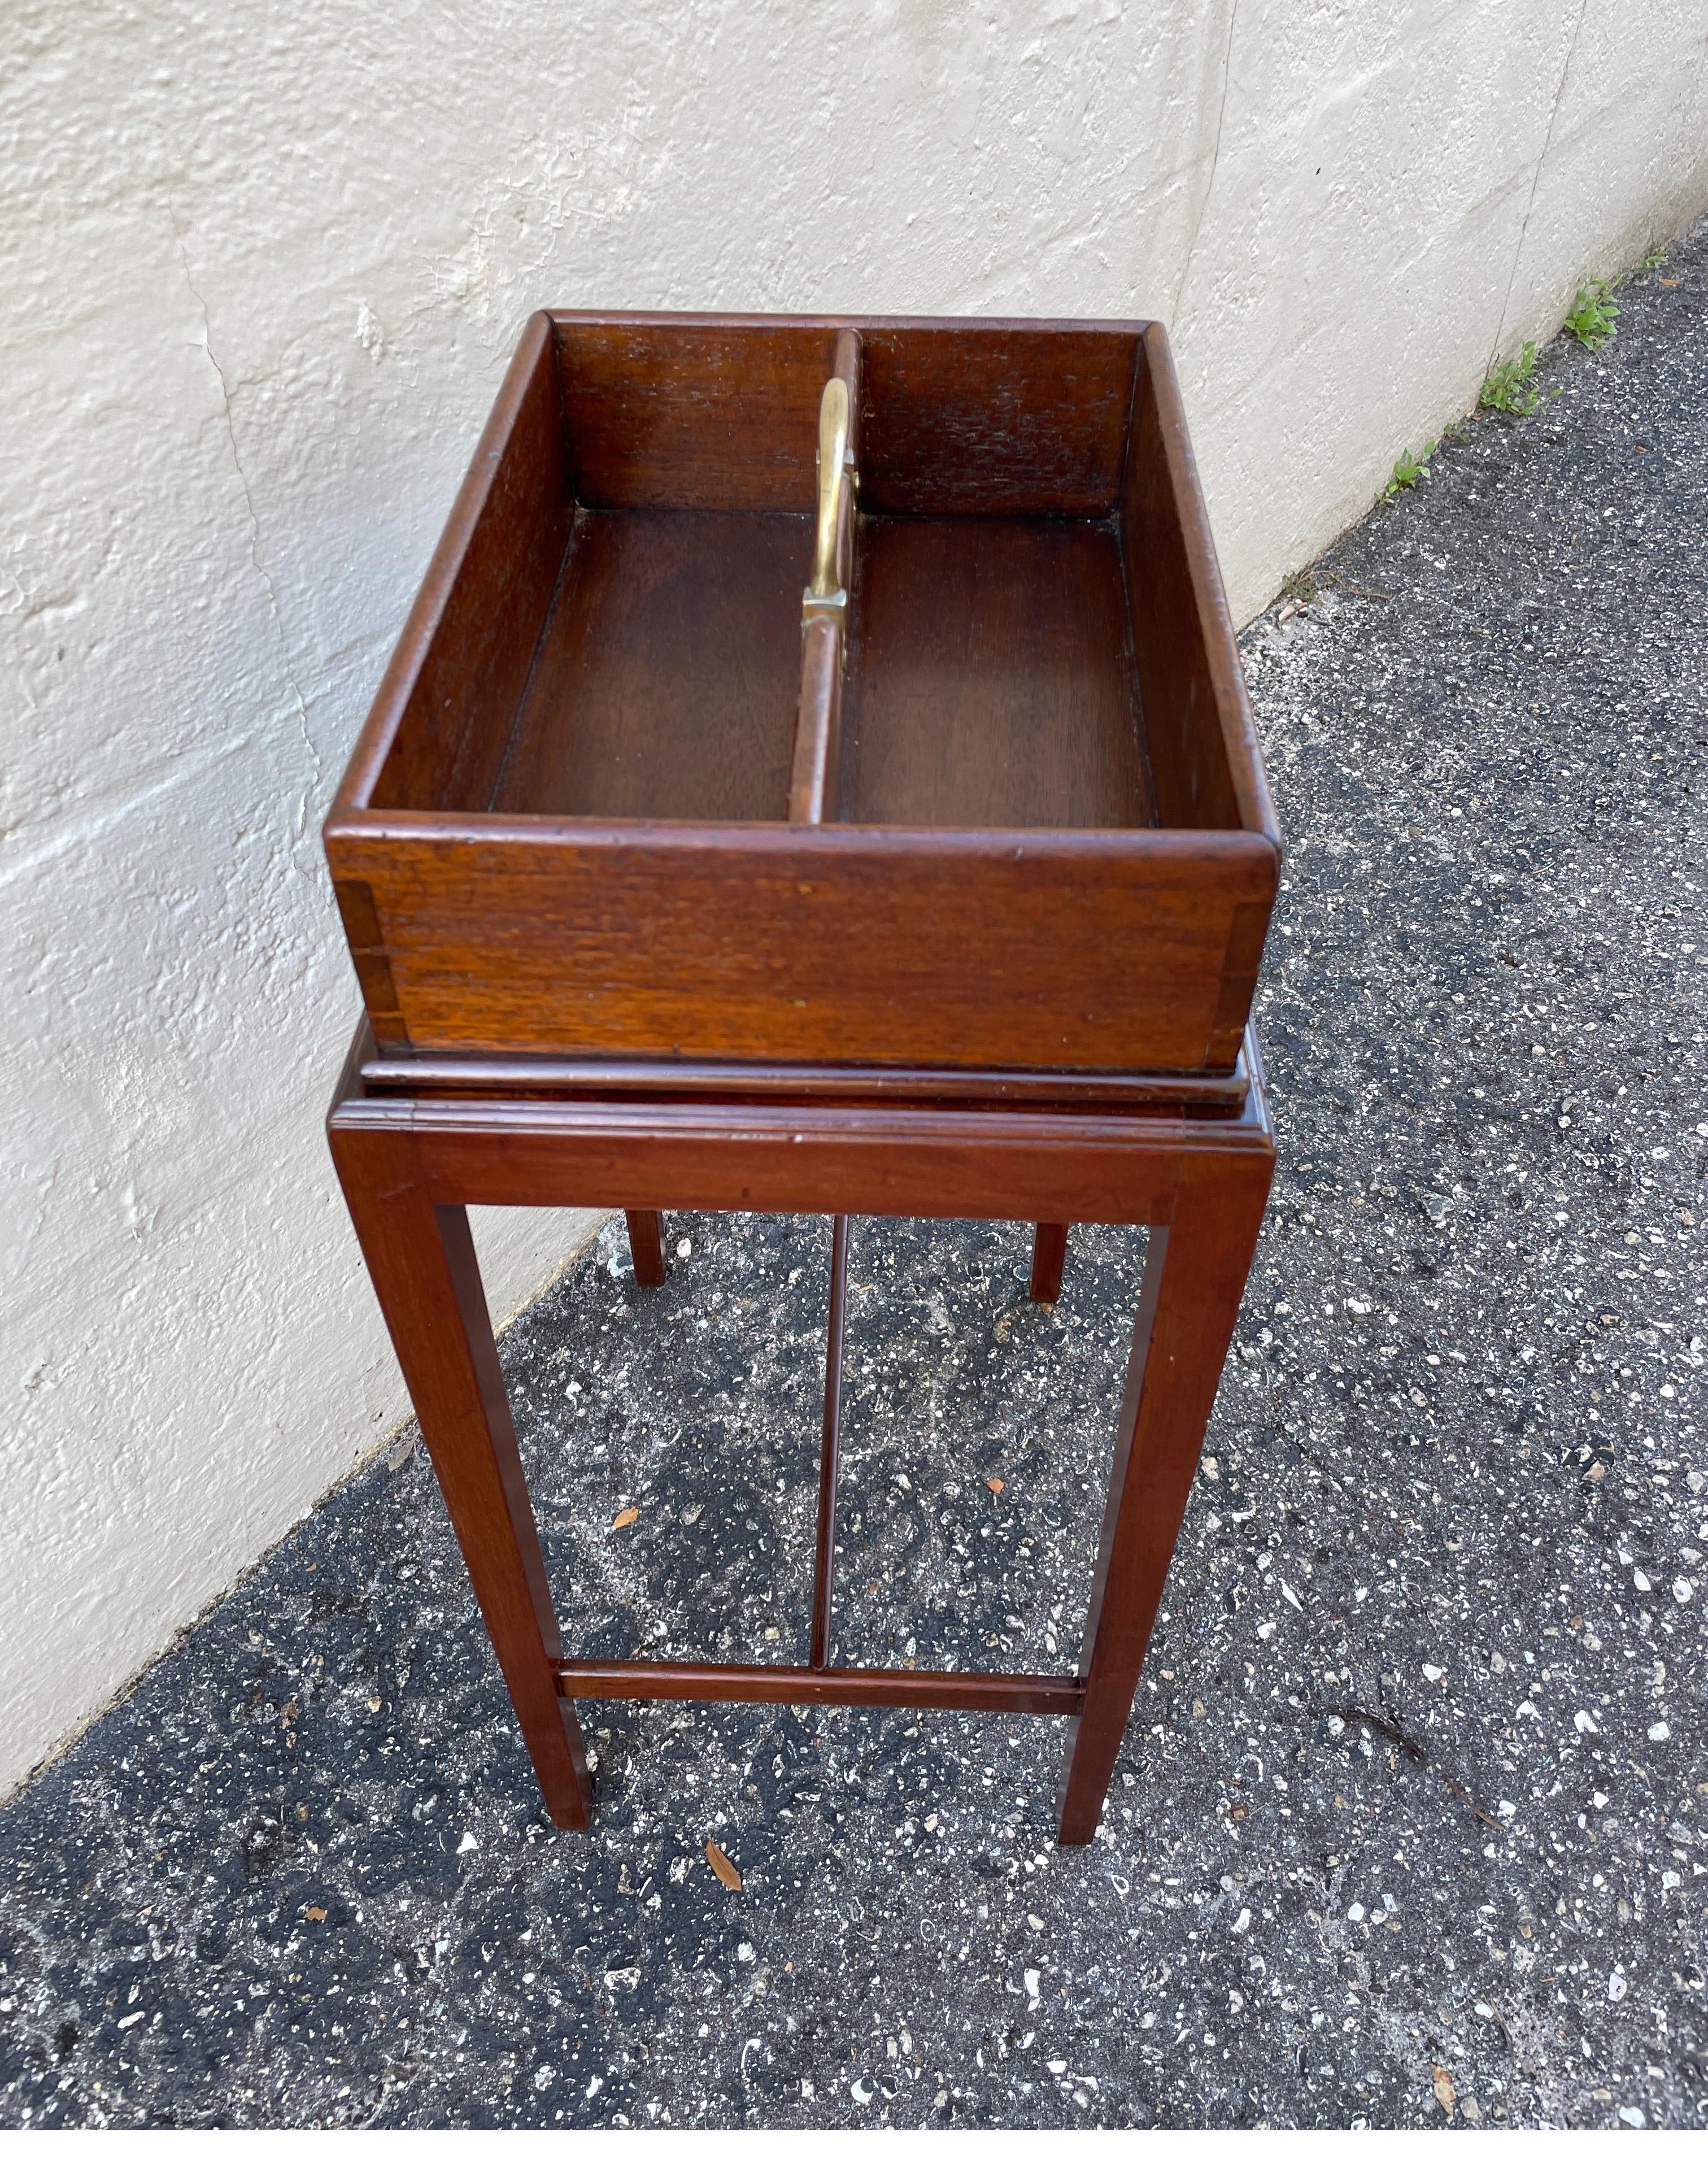 Antique box on stand with brass handle.